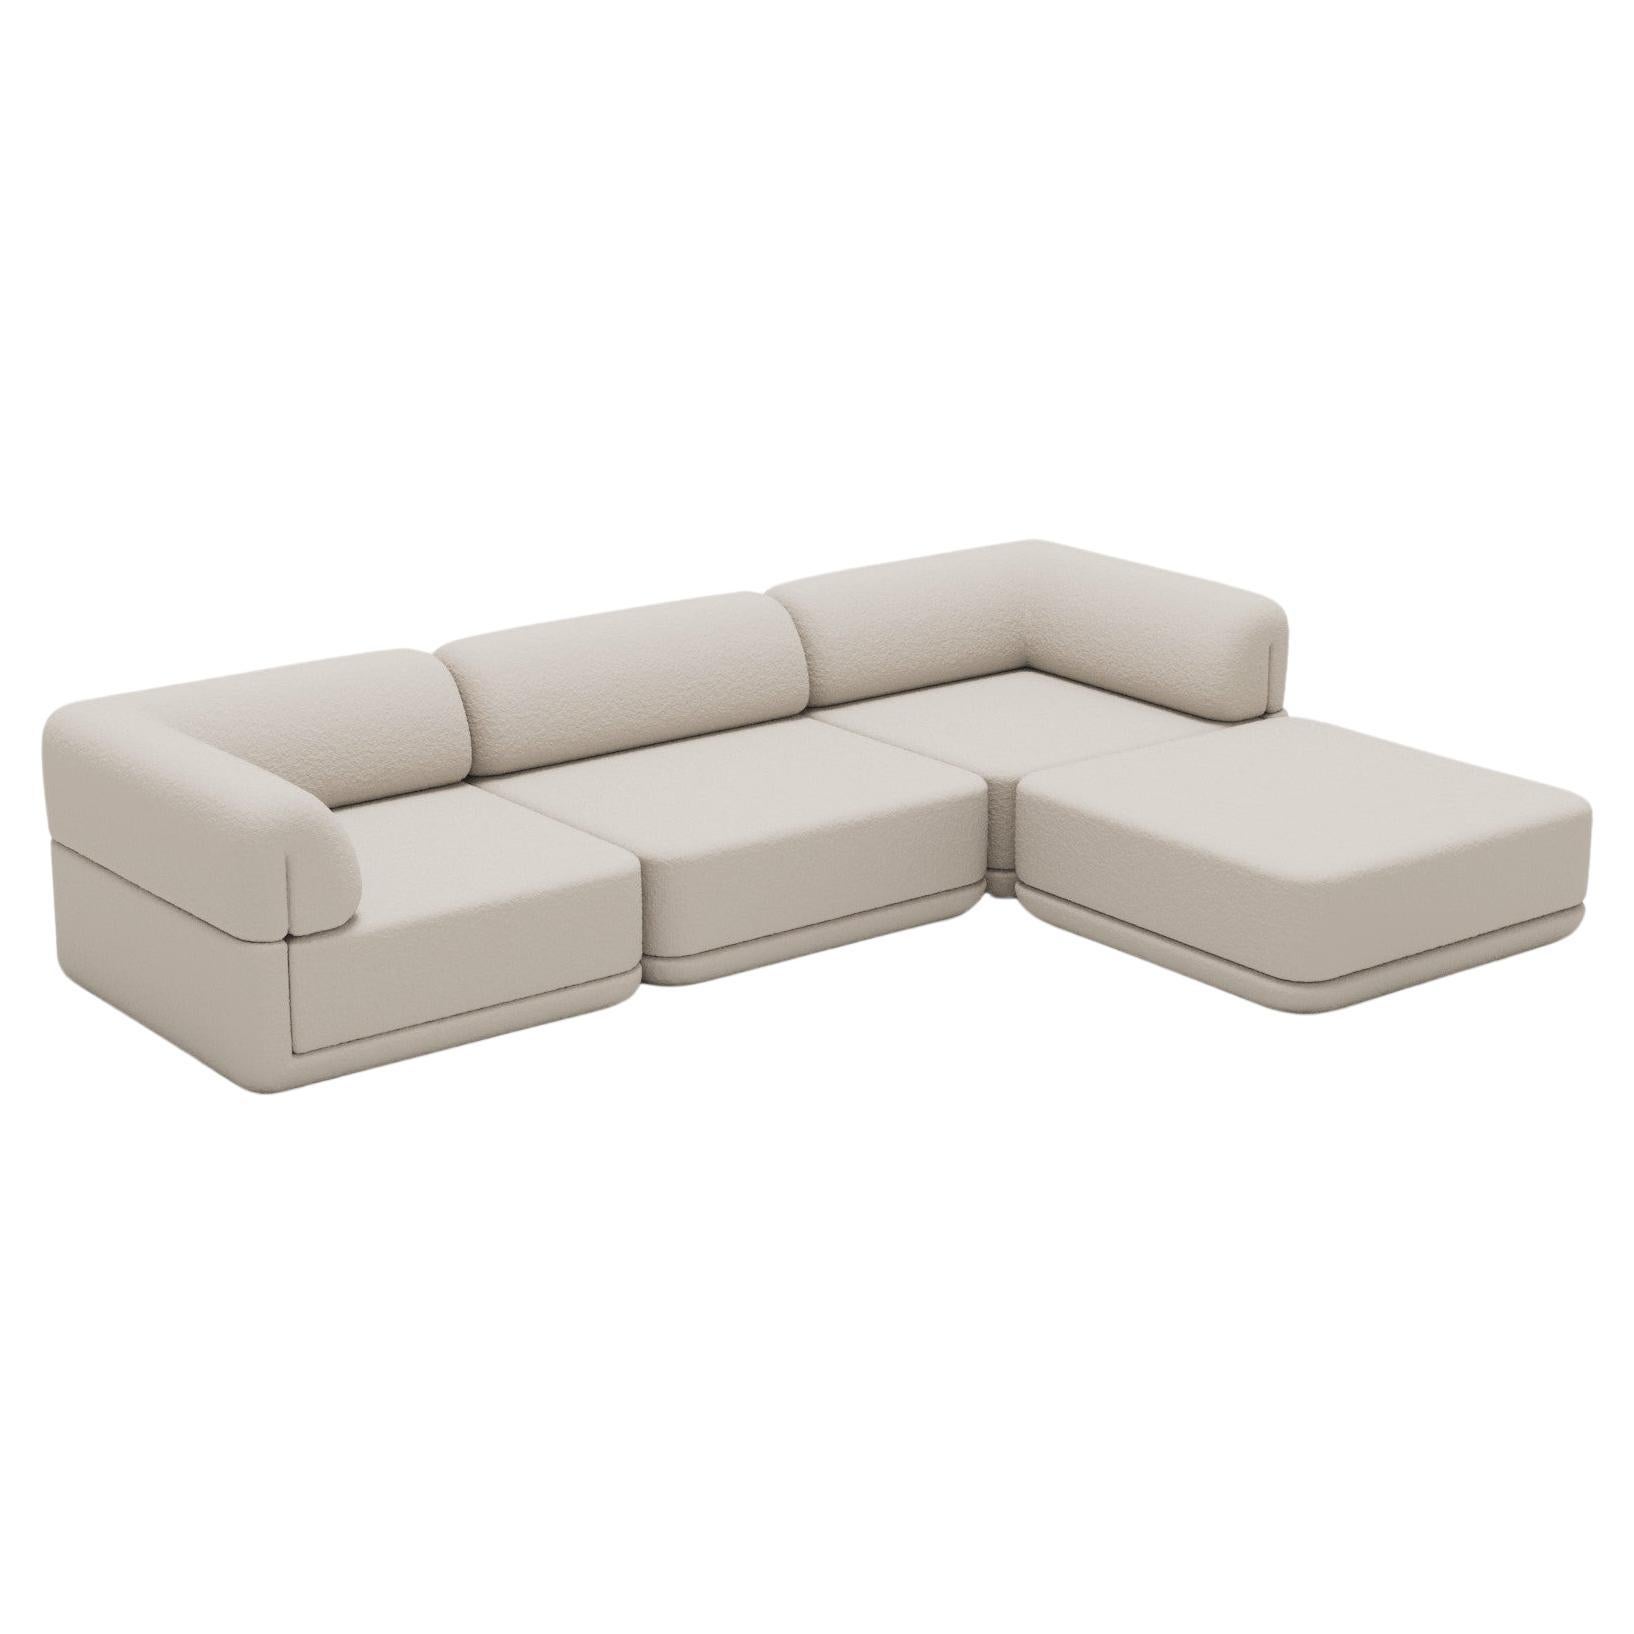 The Cube Sofa - Sofa Lounge with Ottoman For Sale